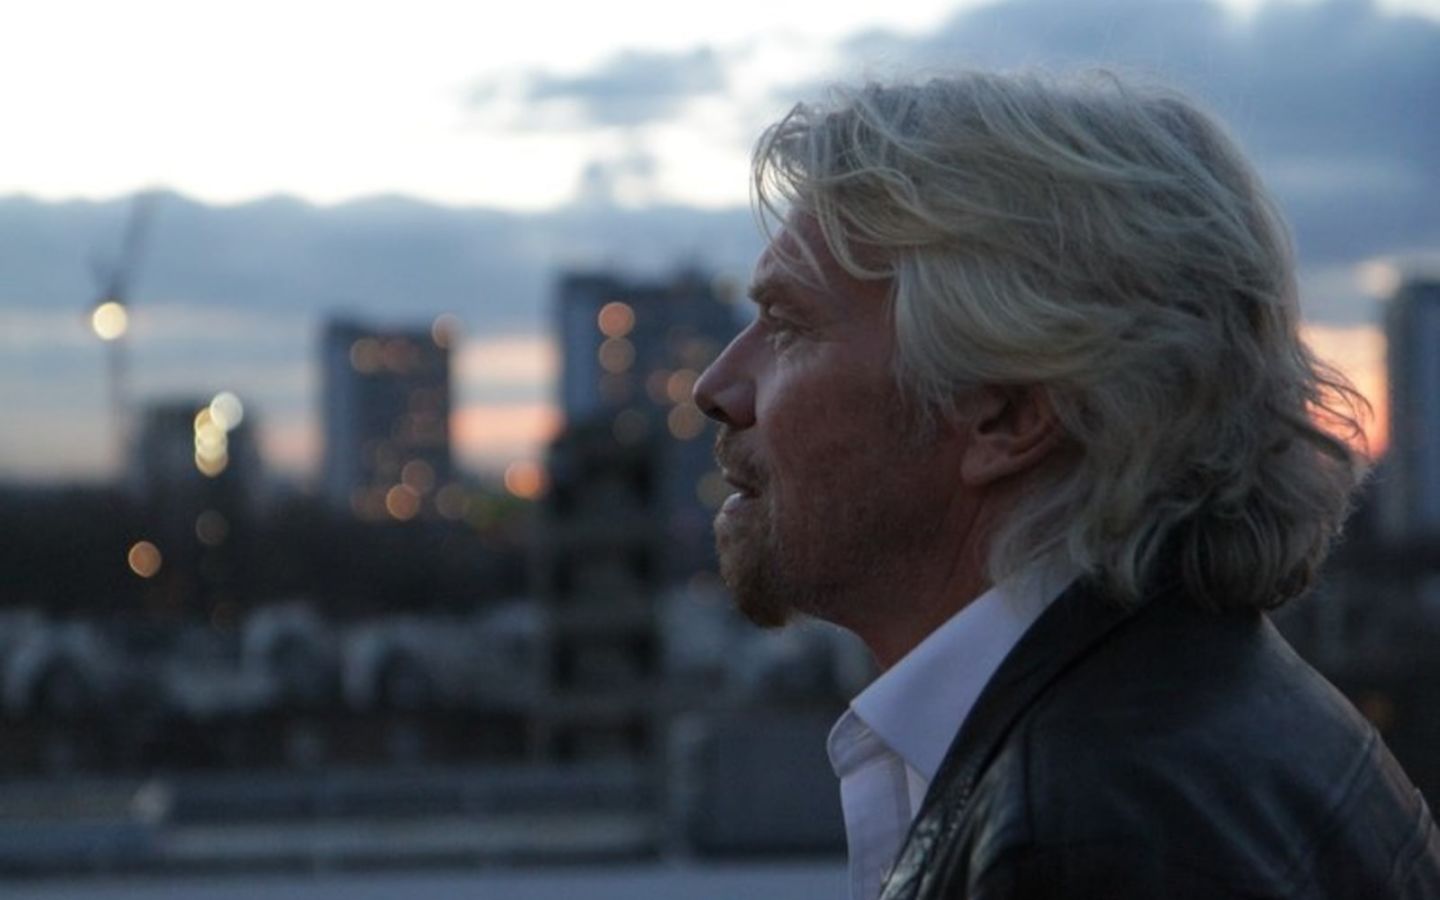 Side profile of Richard Branson looking pensive with sky and buildings in the background